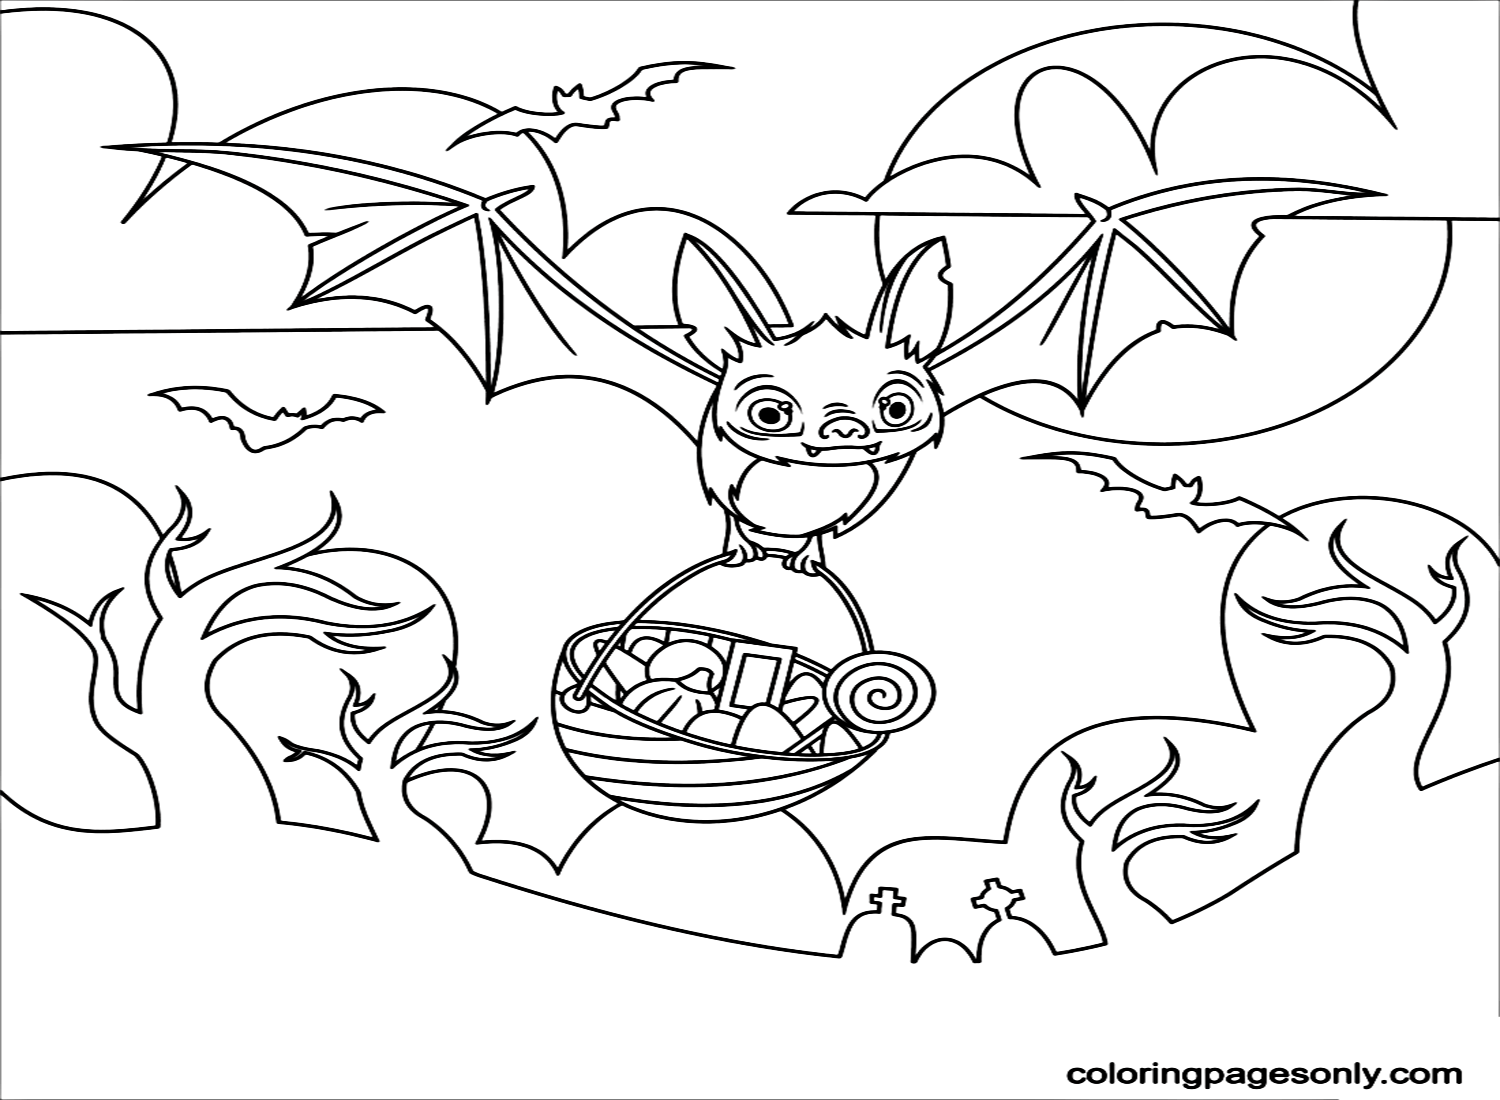 bat-coloring-page-for-halloween-halloween-bats-coloring-pages